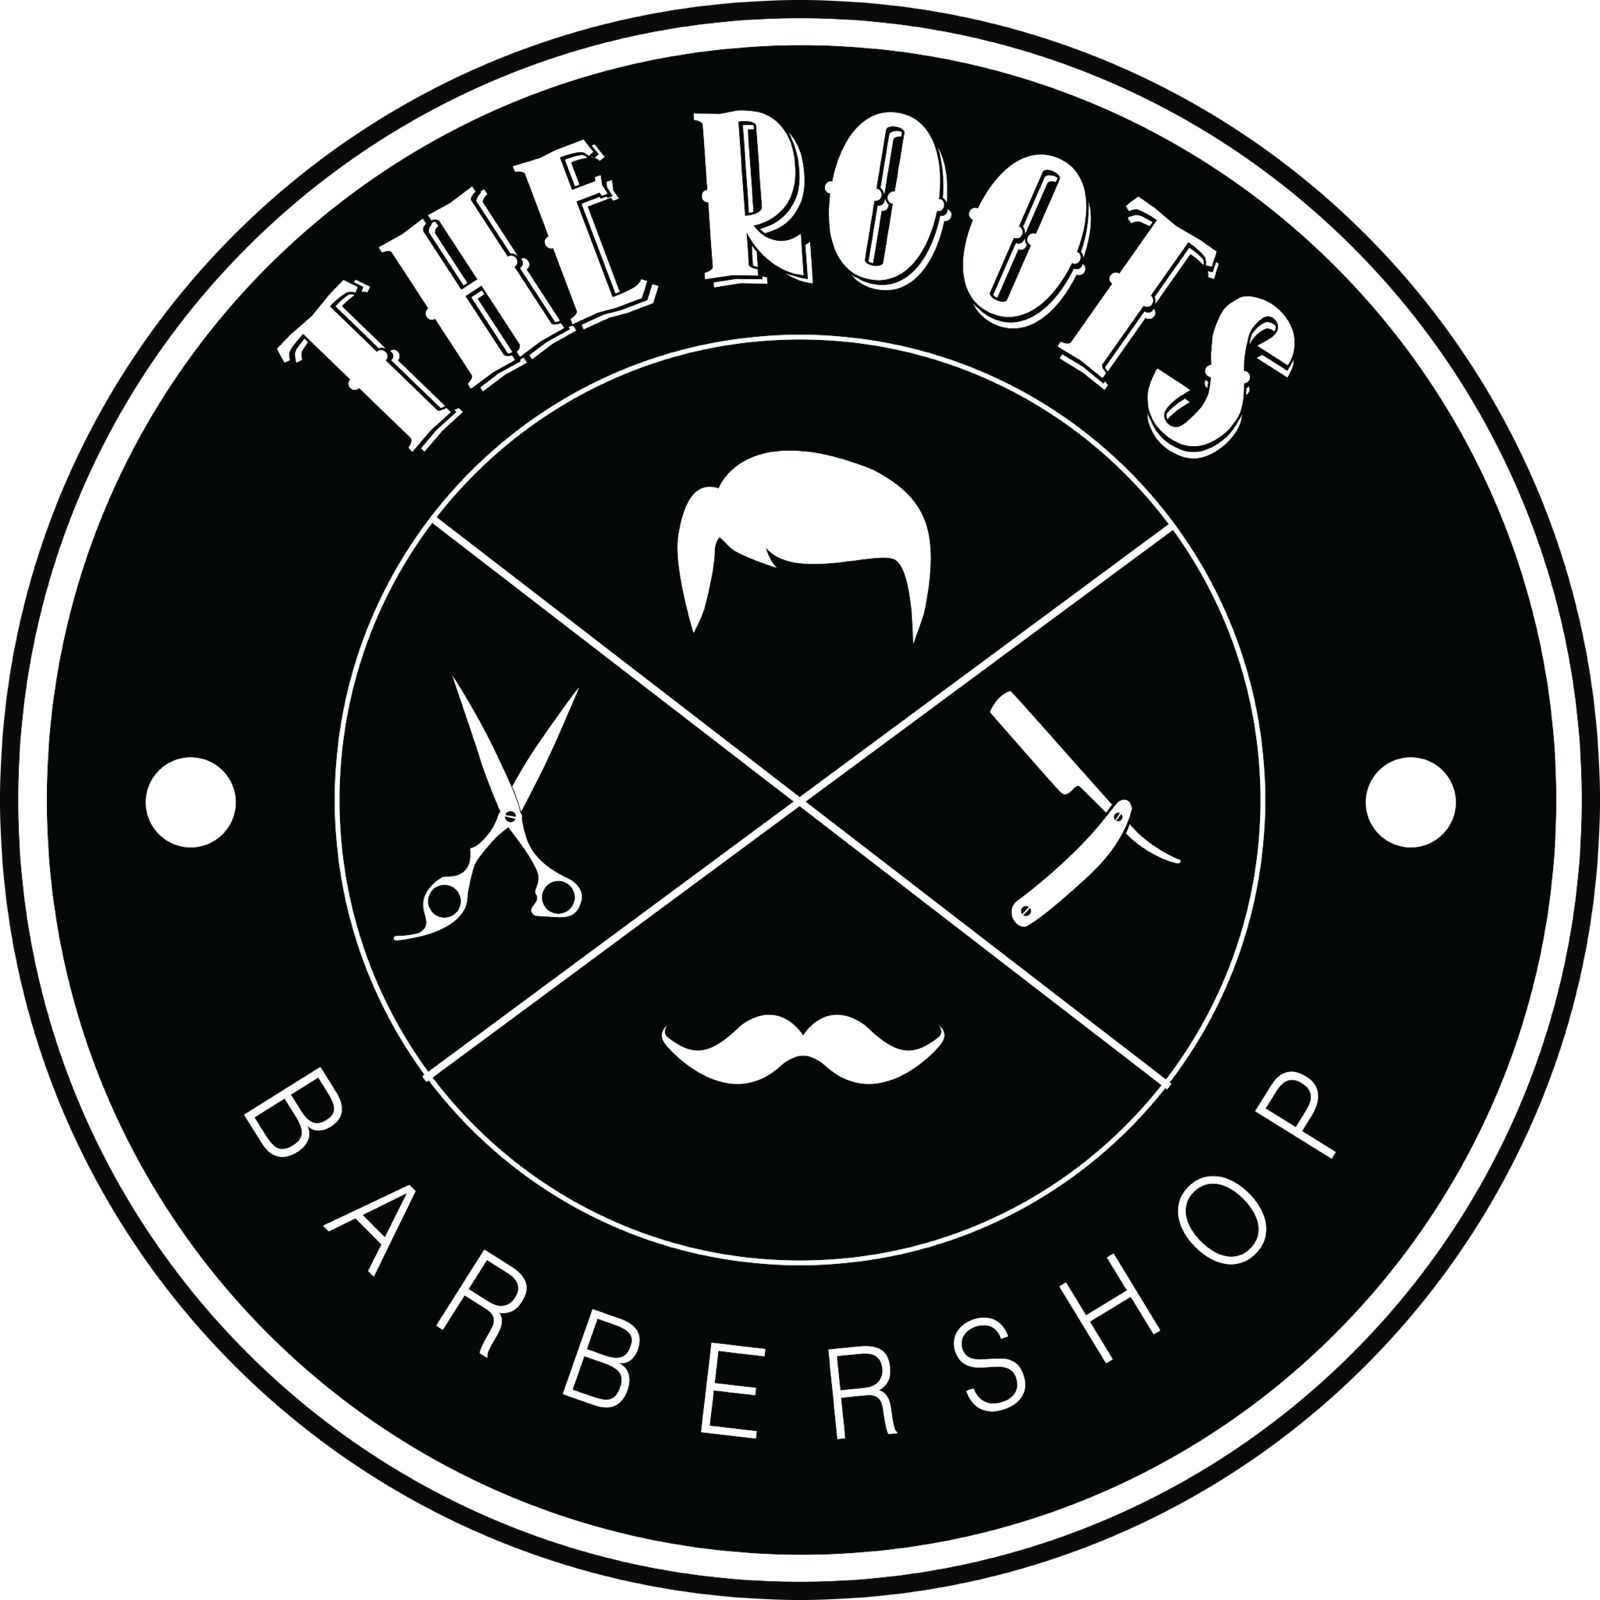 The Roots Babershop